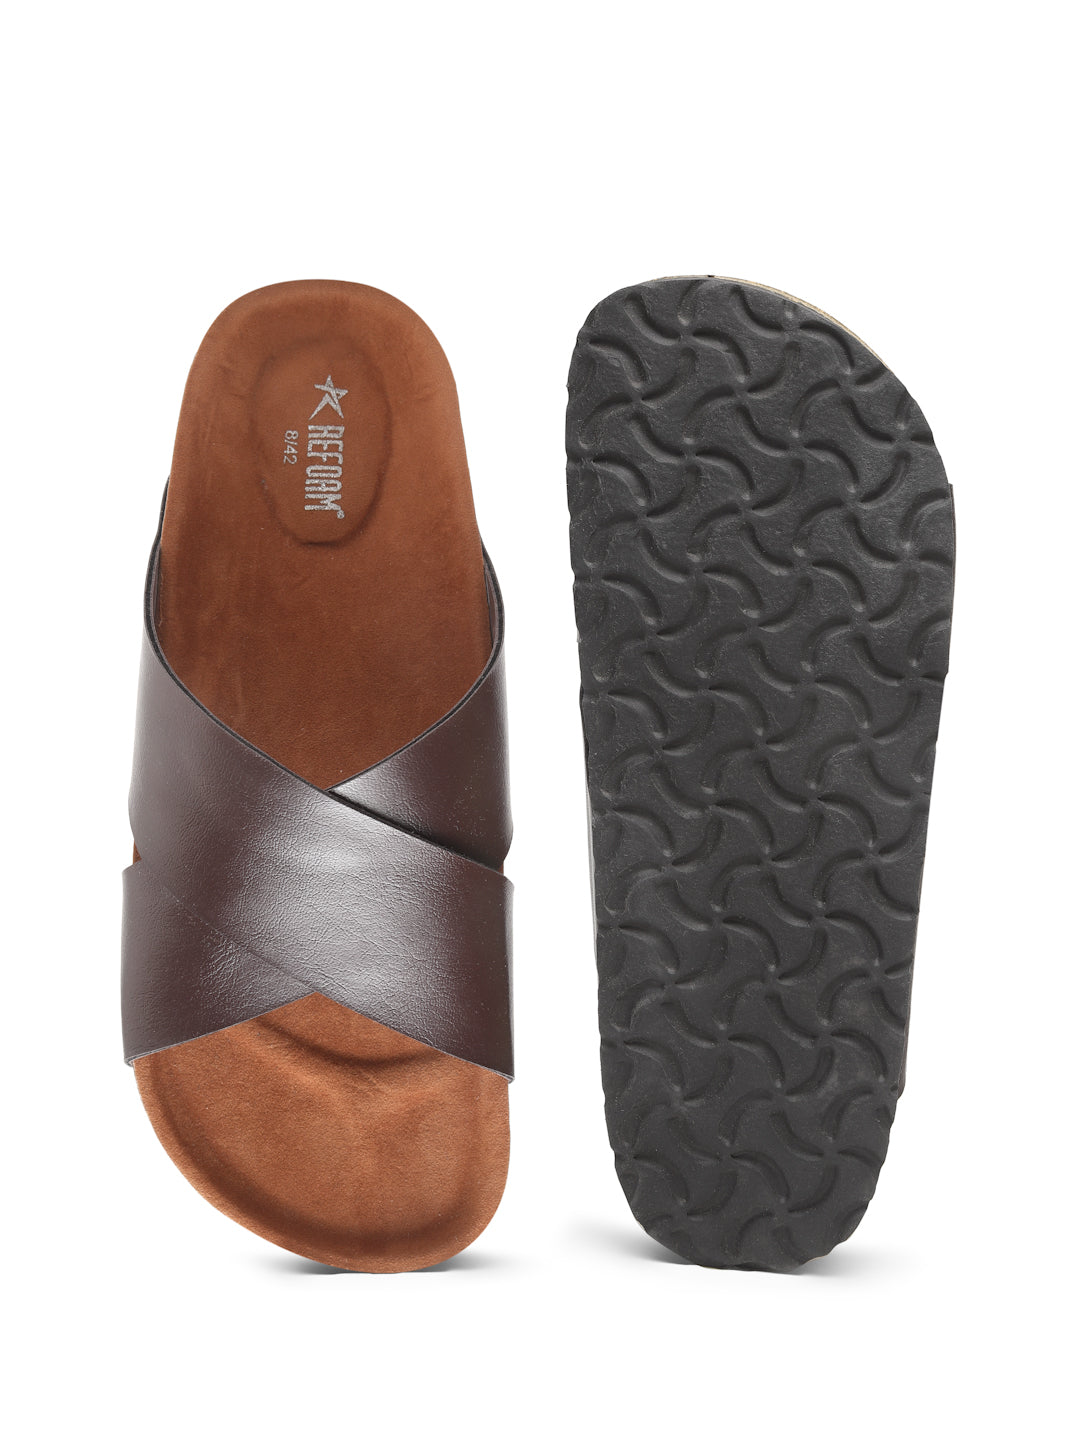 Dark Brown Solid Synthetic Leather Slip on Slippers For Men's